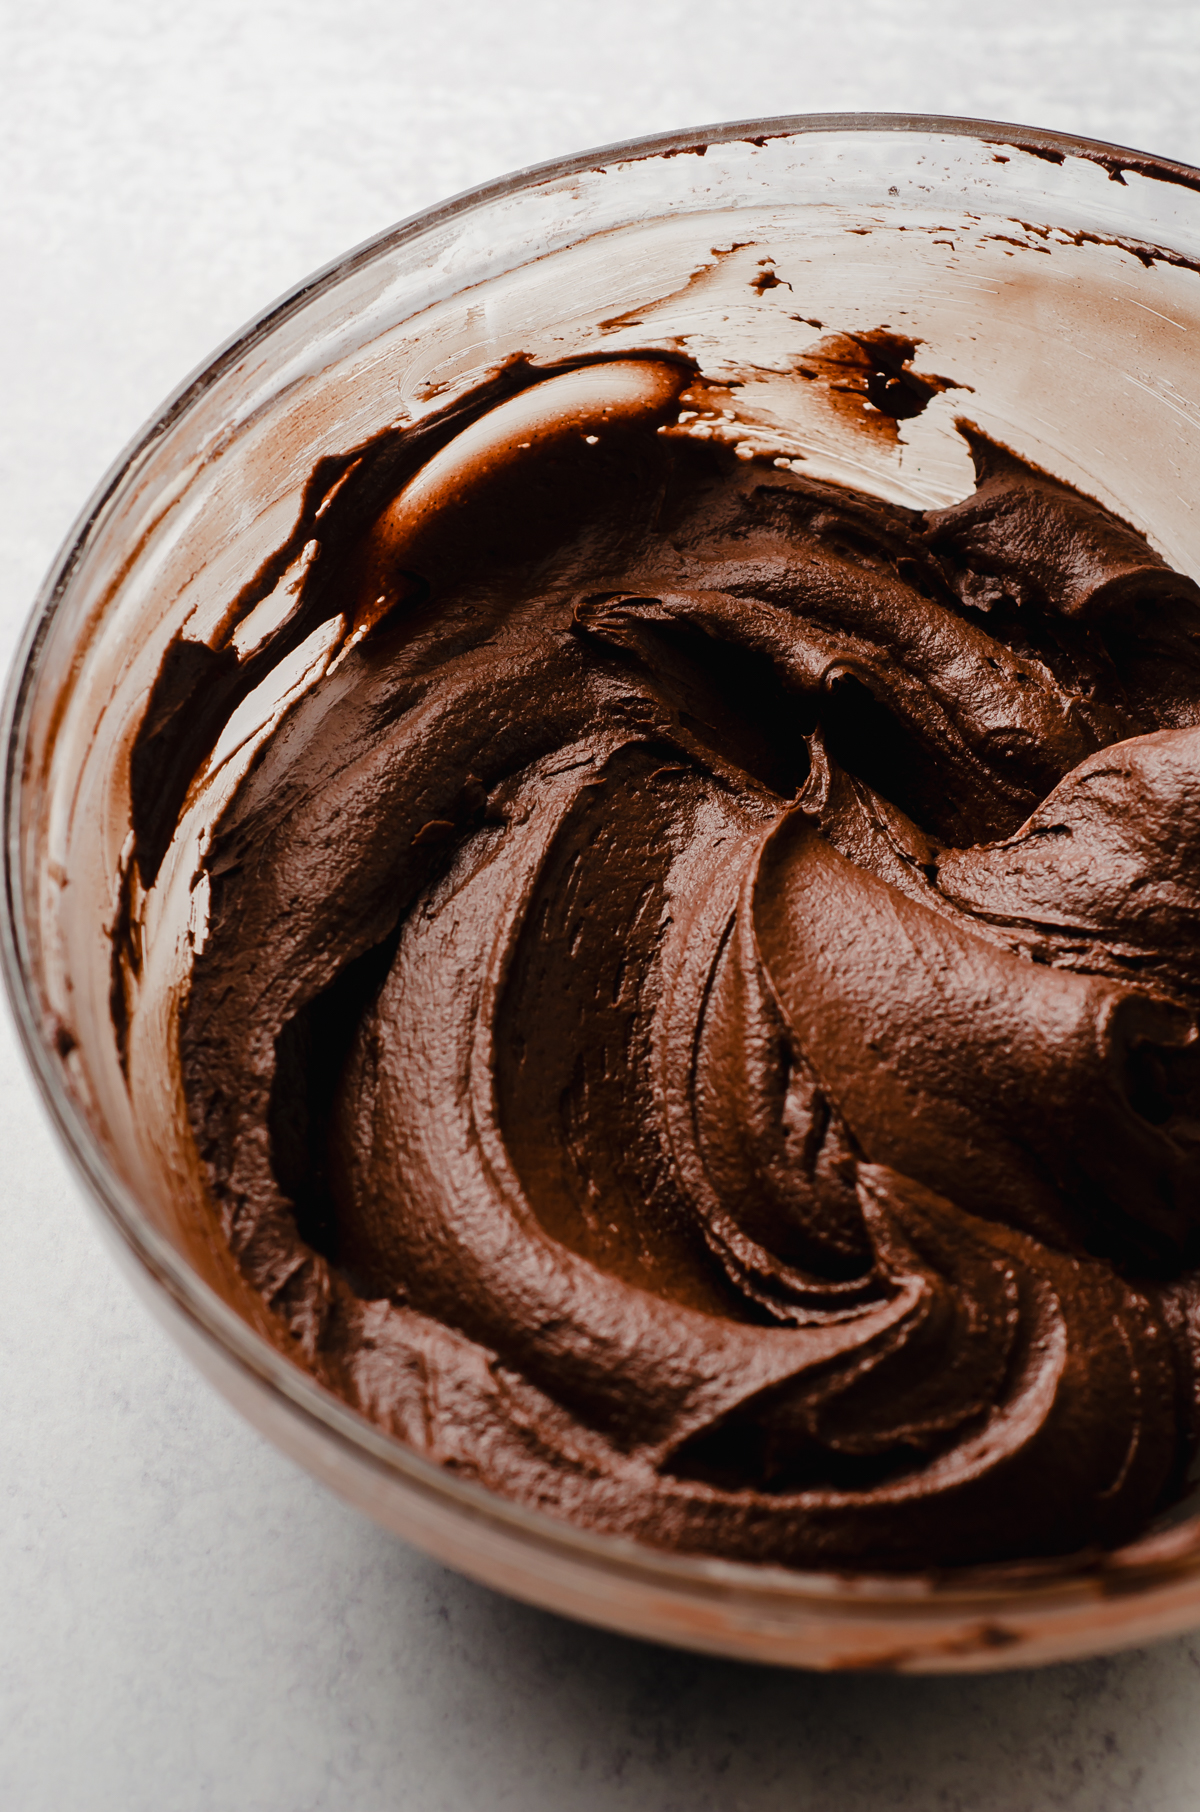 A bowl of chocolate frosting made with cocoa powder in a bowl.